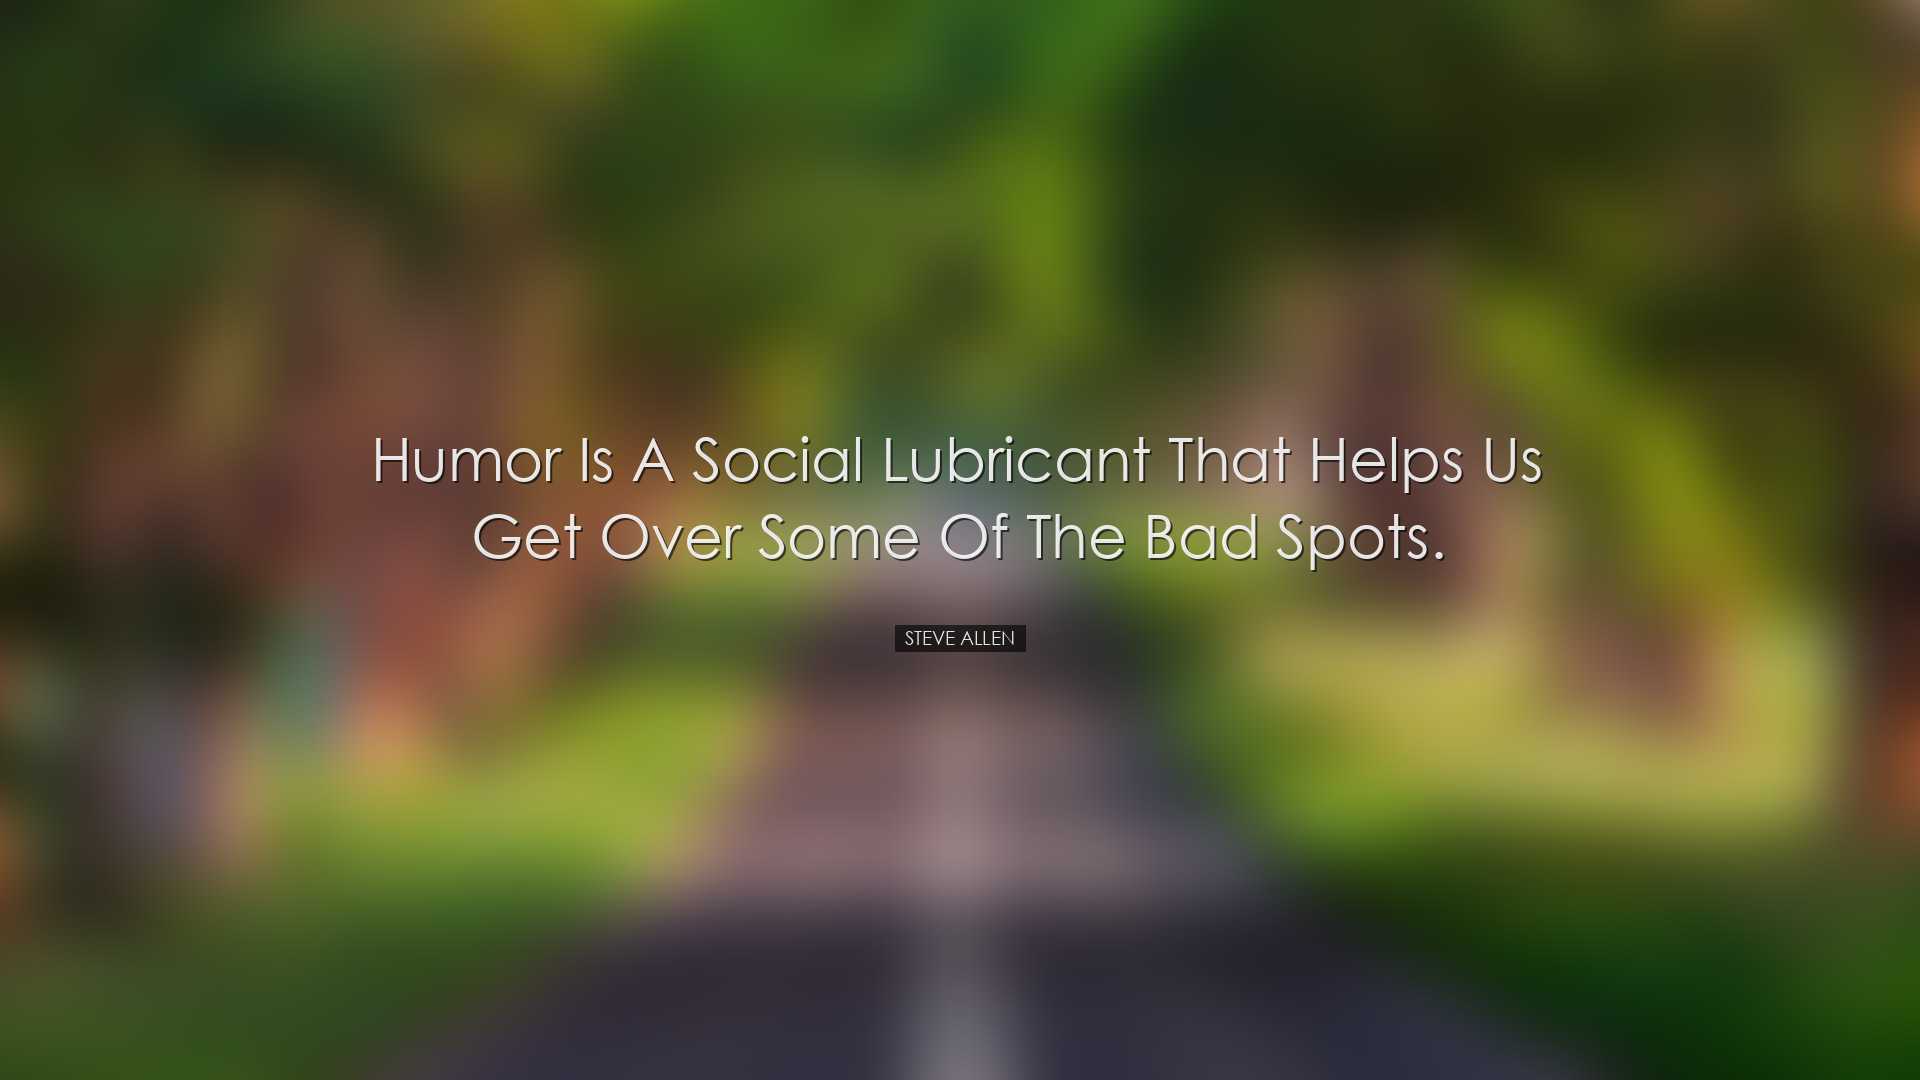 Humor is a social lubricant that helps us get over some of the bad